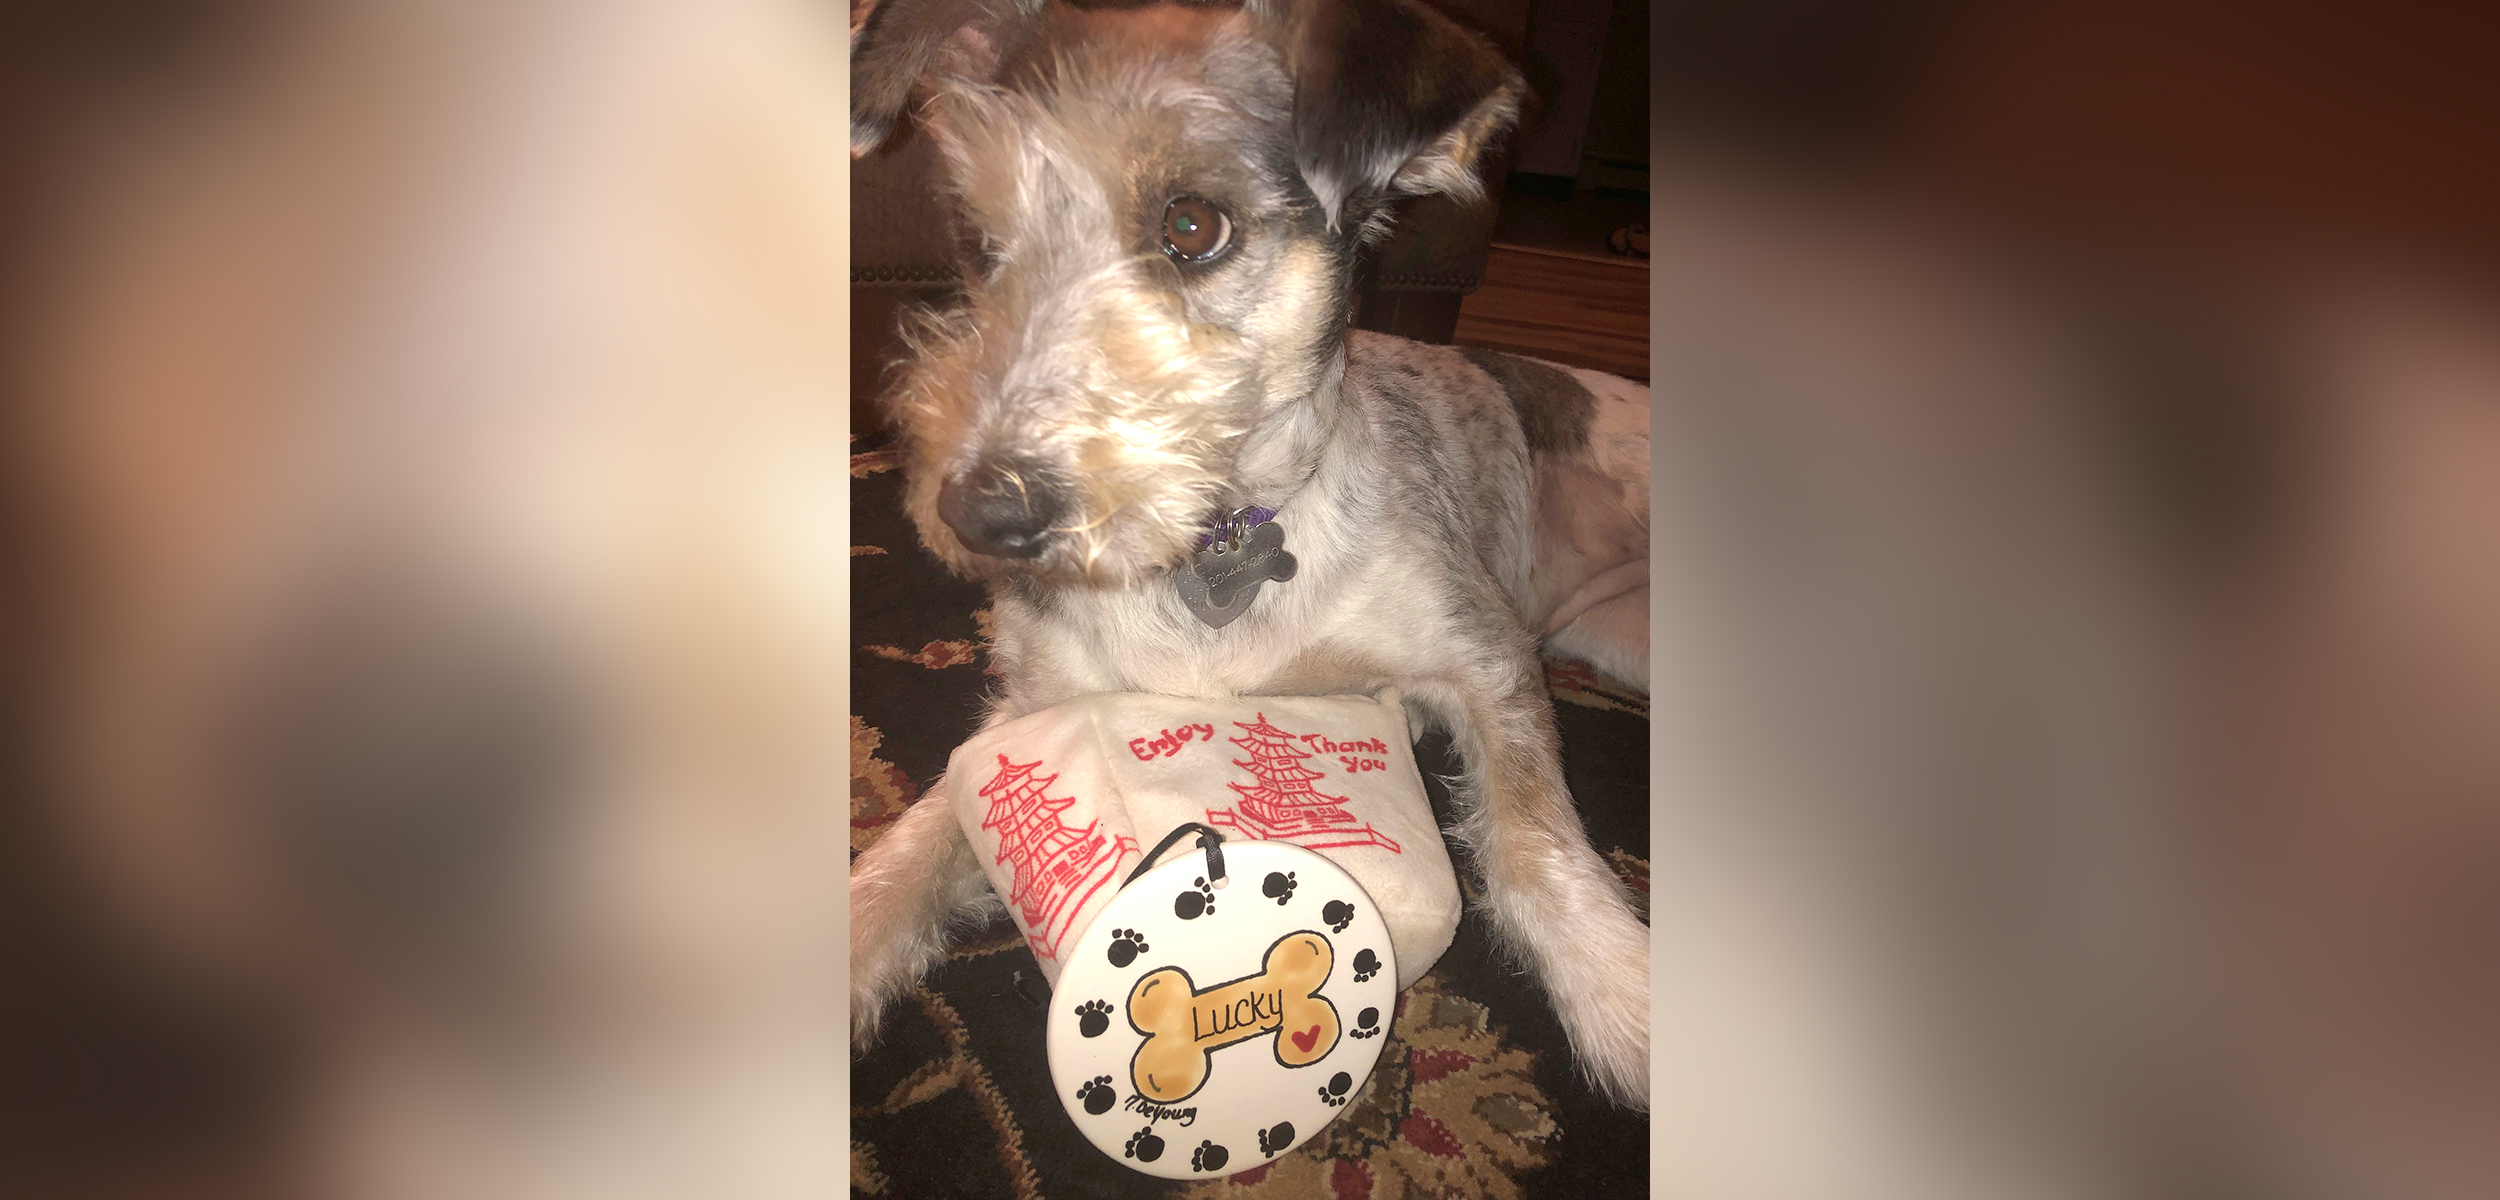 PHOTO: Orlando Ippolito and Otis Williams surprised their favorite dog Lucky with a personalized Christmas ornament for the holidays.